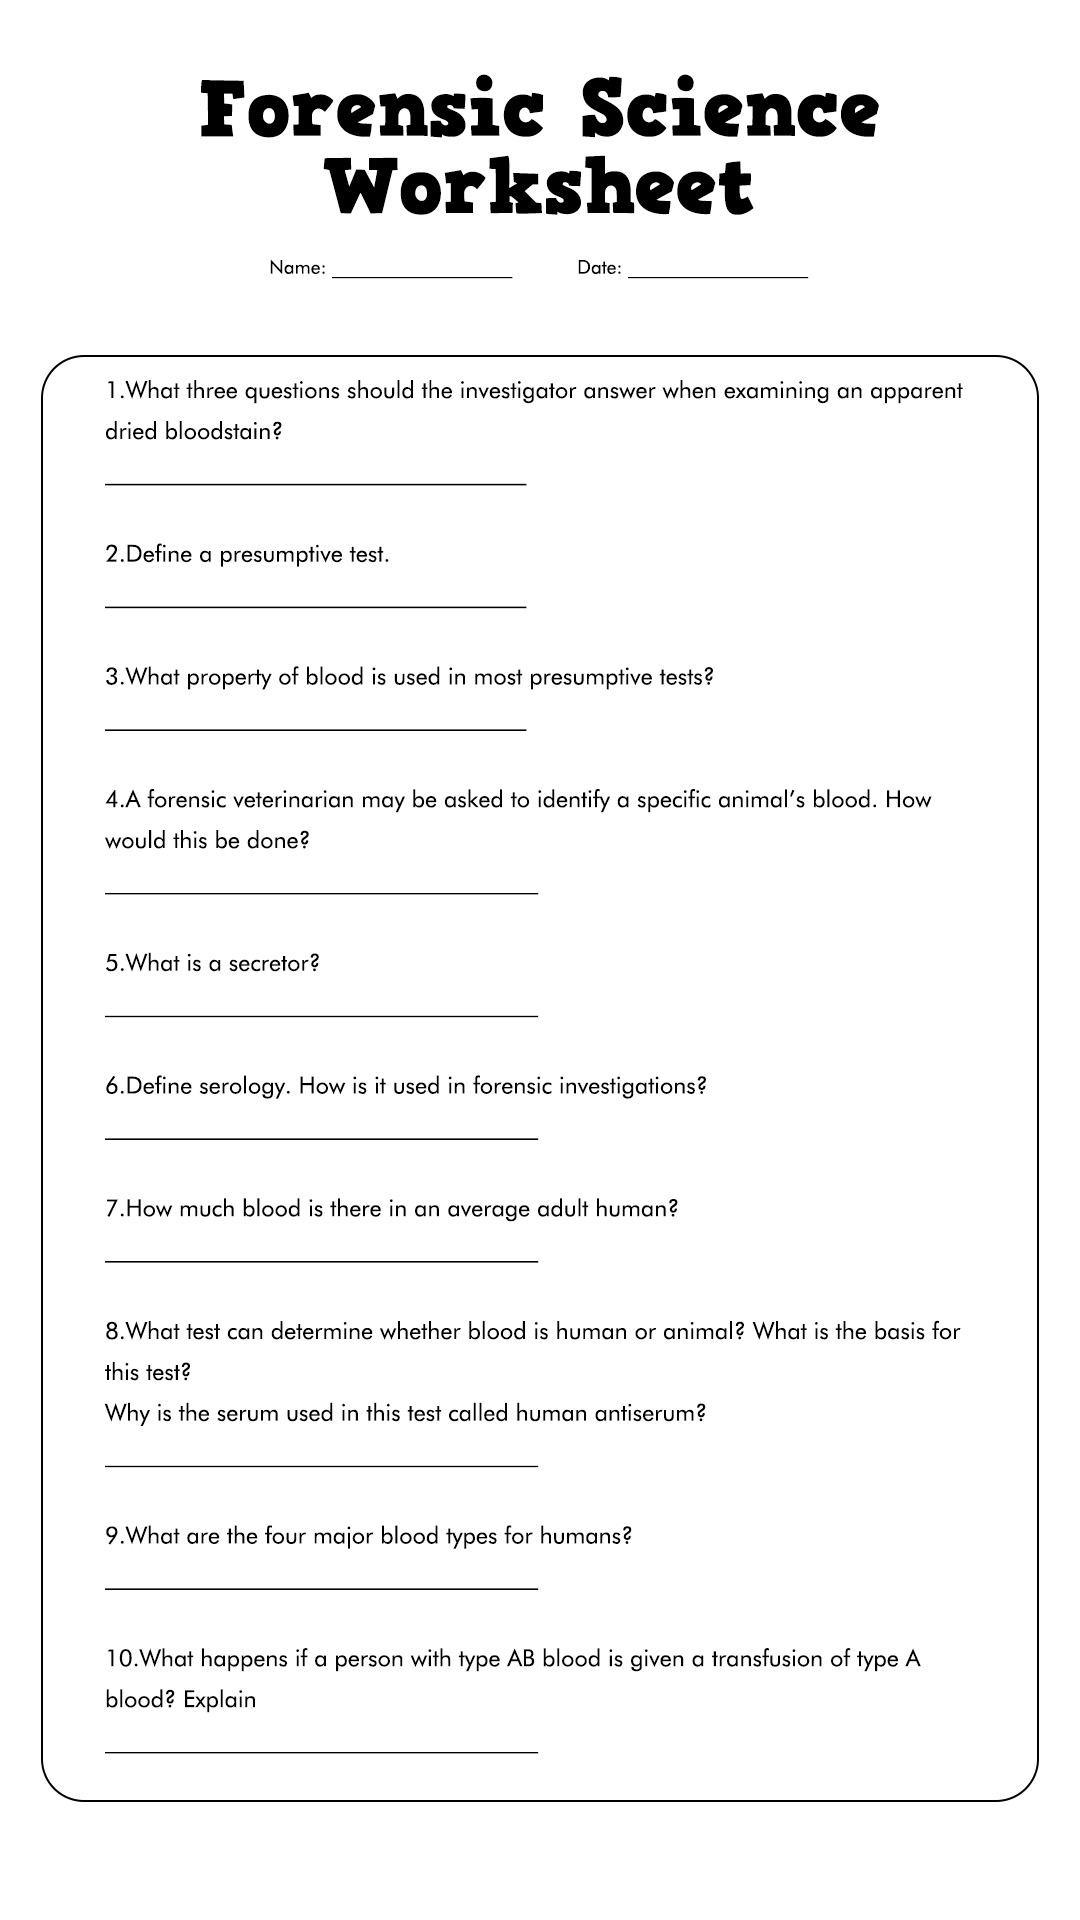 Forensic Science Worksheet Answers Image